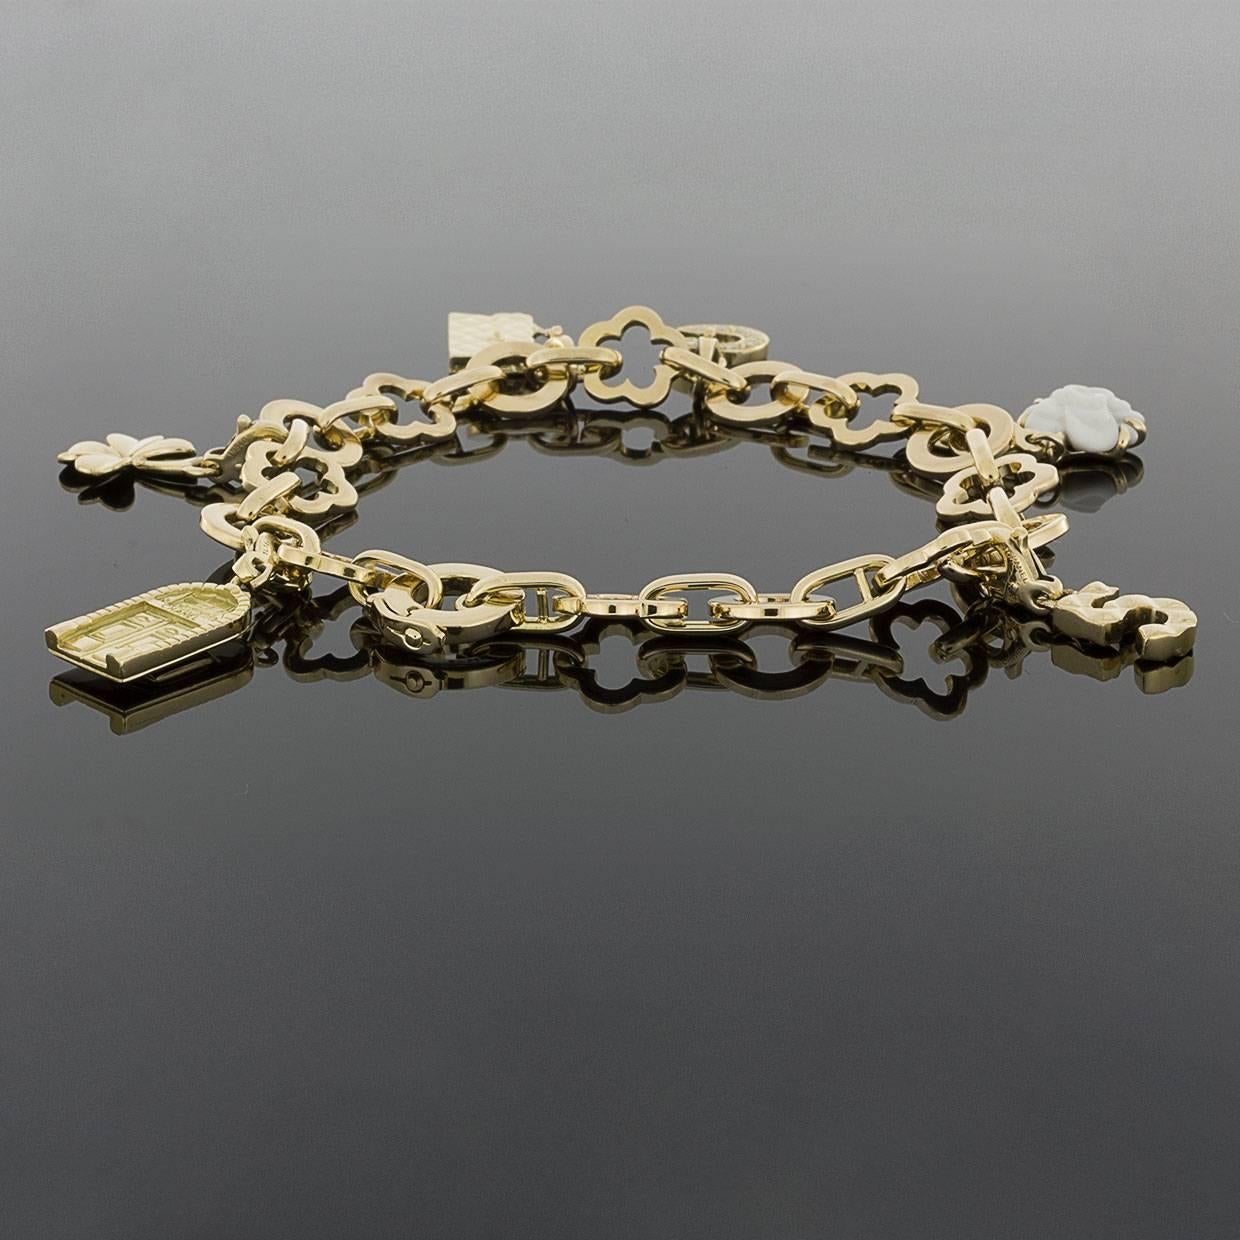 Chanel Mademoiselle Collection Profil de Camelia Bracelet with Six Charms 1